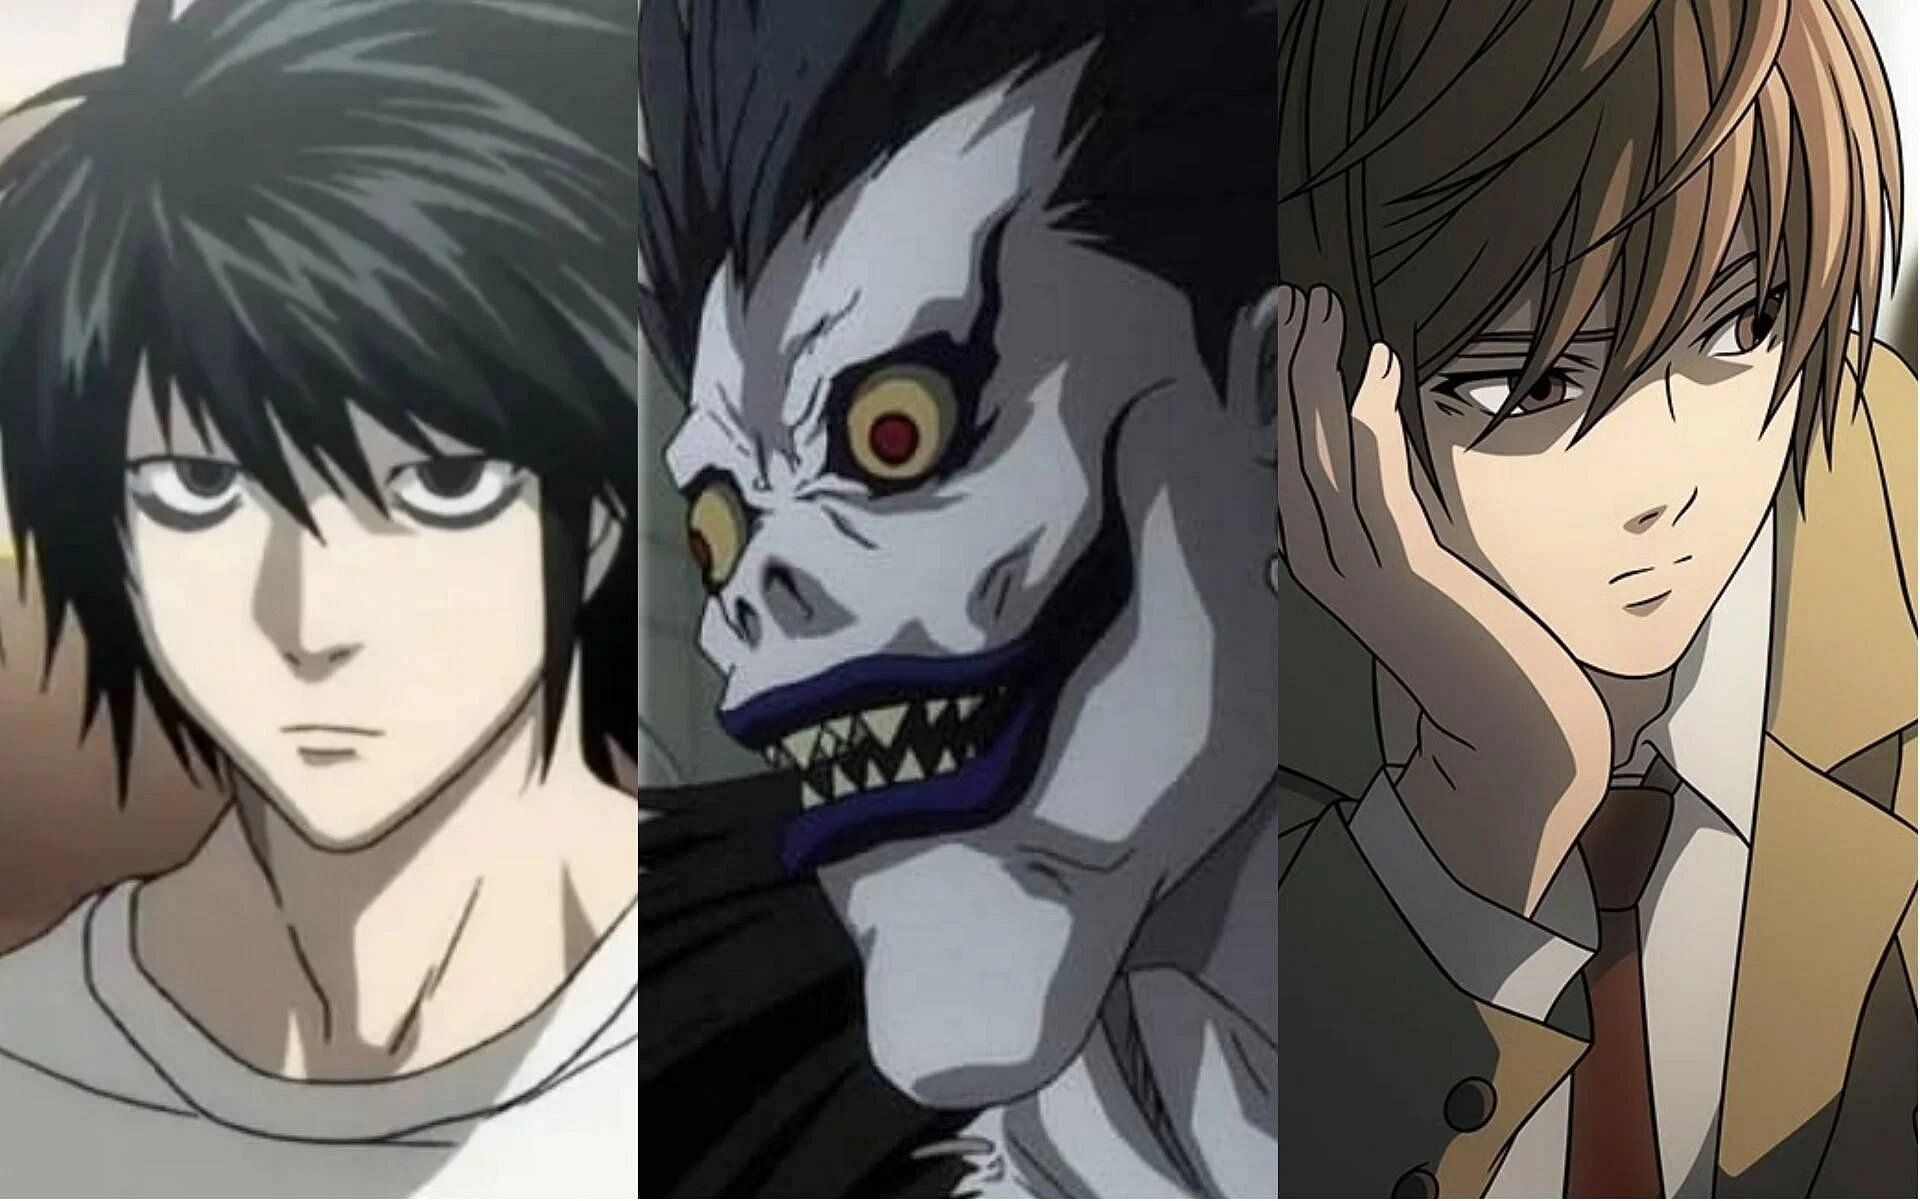 L, Ryuk, and Light Yagami in the anime (Image via Madhouse).